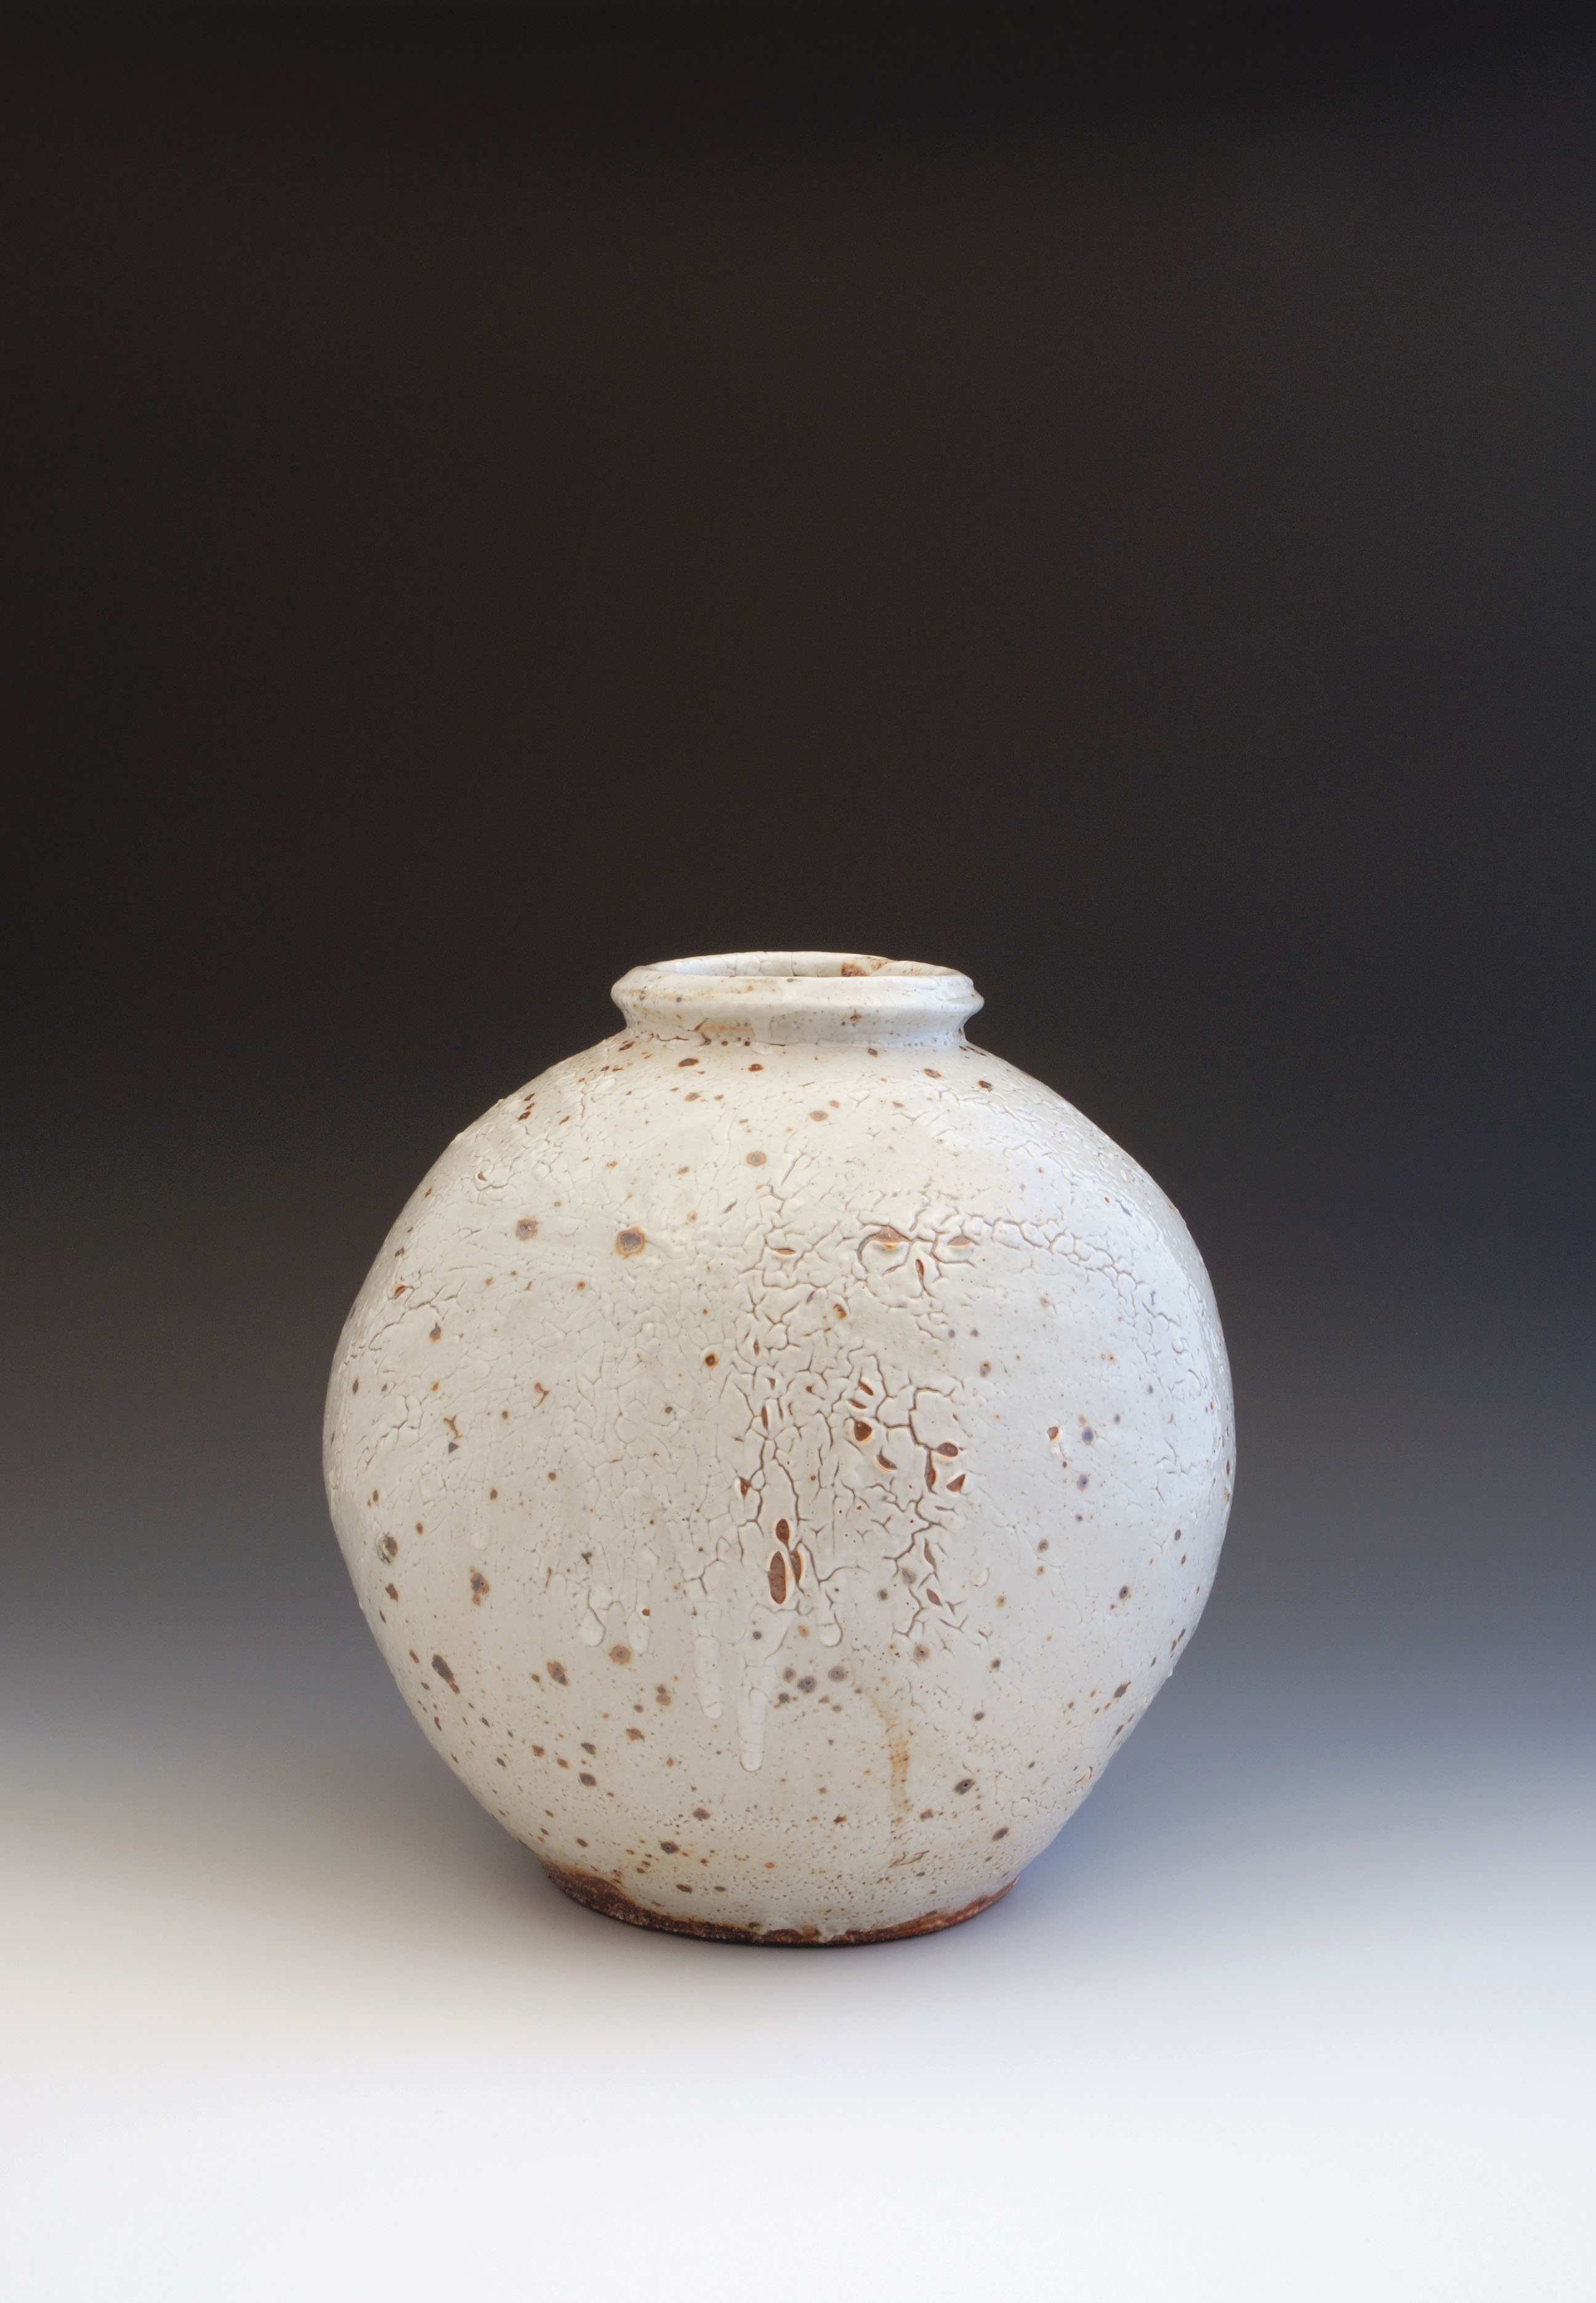 Round jar with iron spots, 12 in. (30 cm) in height, thrown stoneware with white Shino glaze, fired to Cone 9. Photos: Jay Goldmark, Andy Stewart